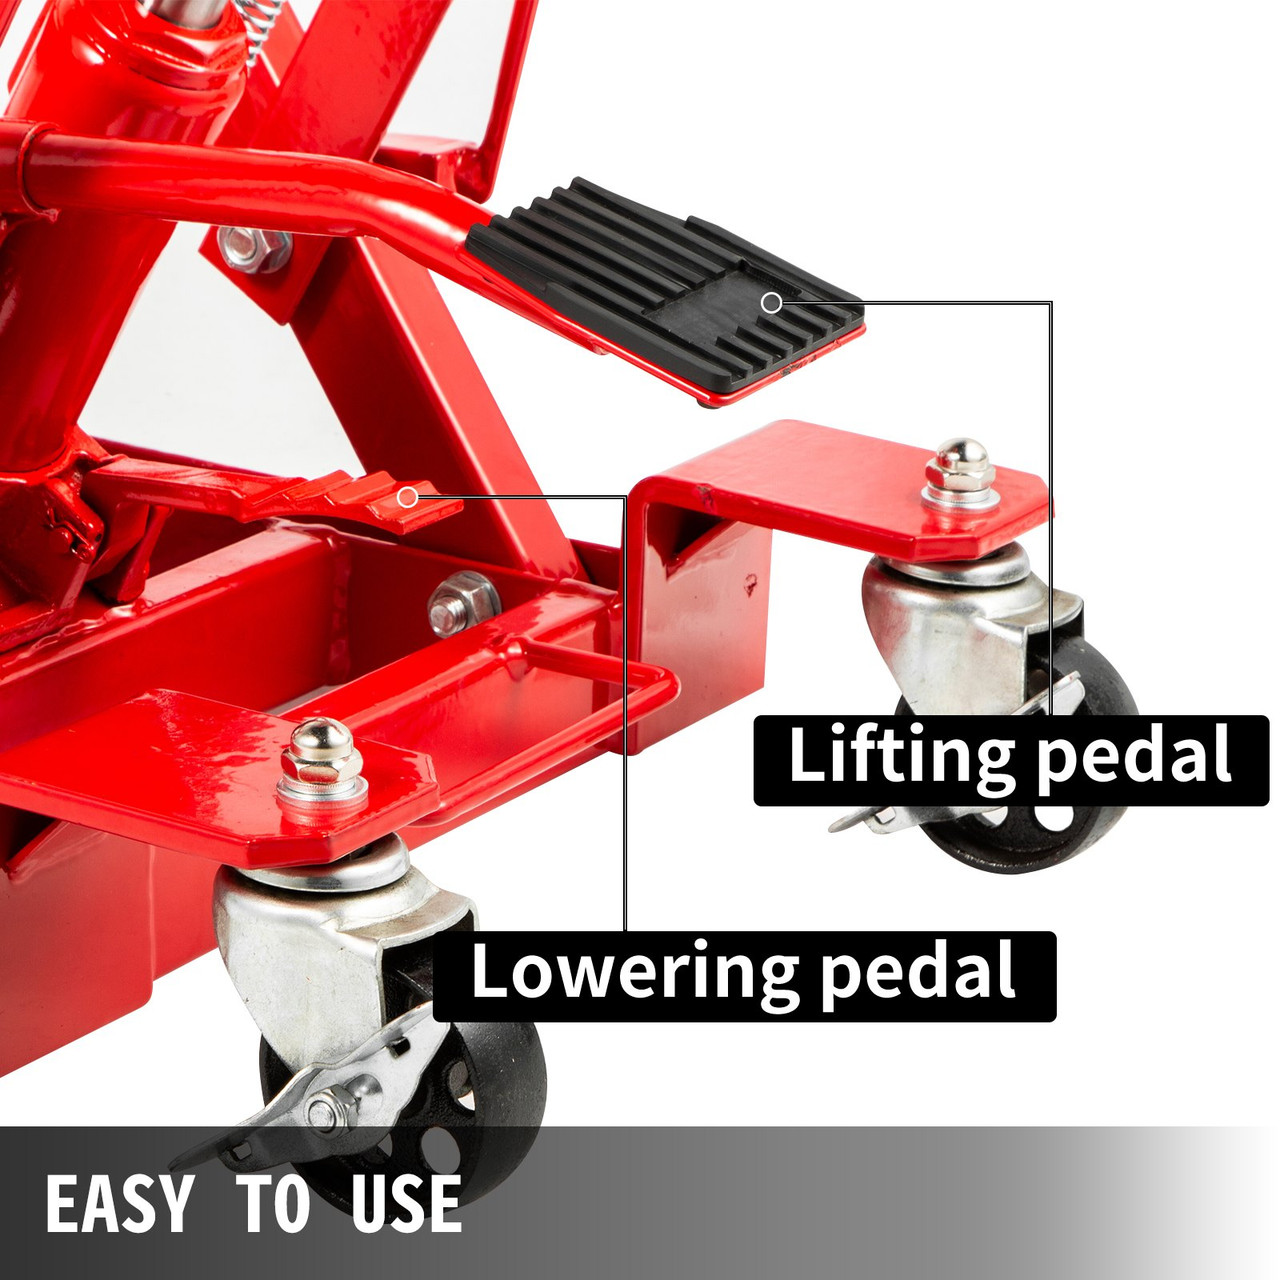 Hydraulic Motorcycle Scissor Jack with 1,500LBS Load Capacity, Motorcycle/ATV Jack Hoist Stand Portable Lift Table, Adjustable Motorcycle Lift Jack,with Built-In Lock Pin Red